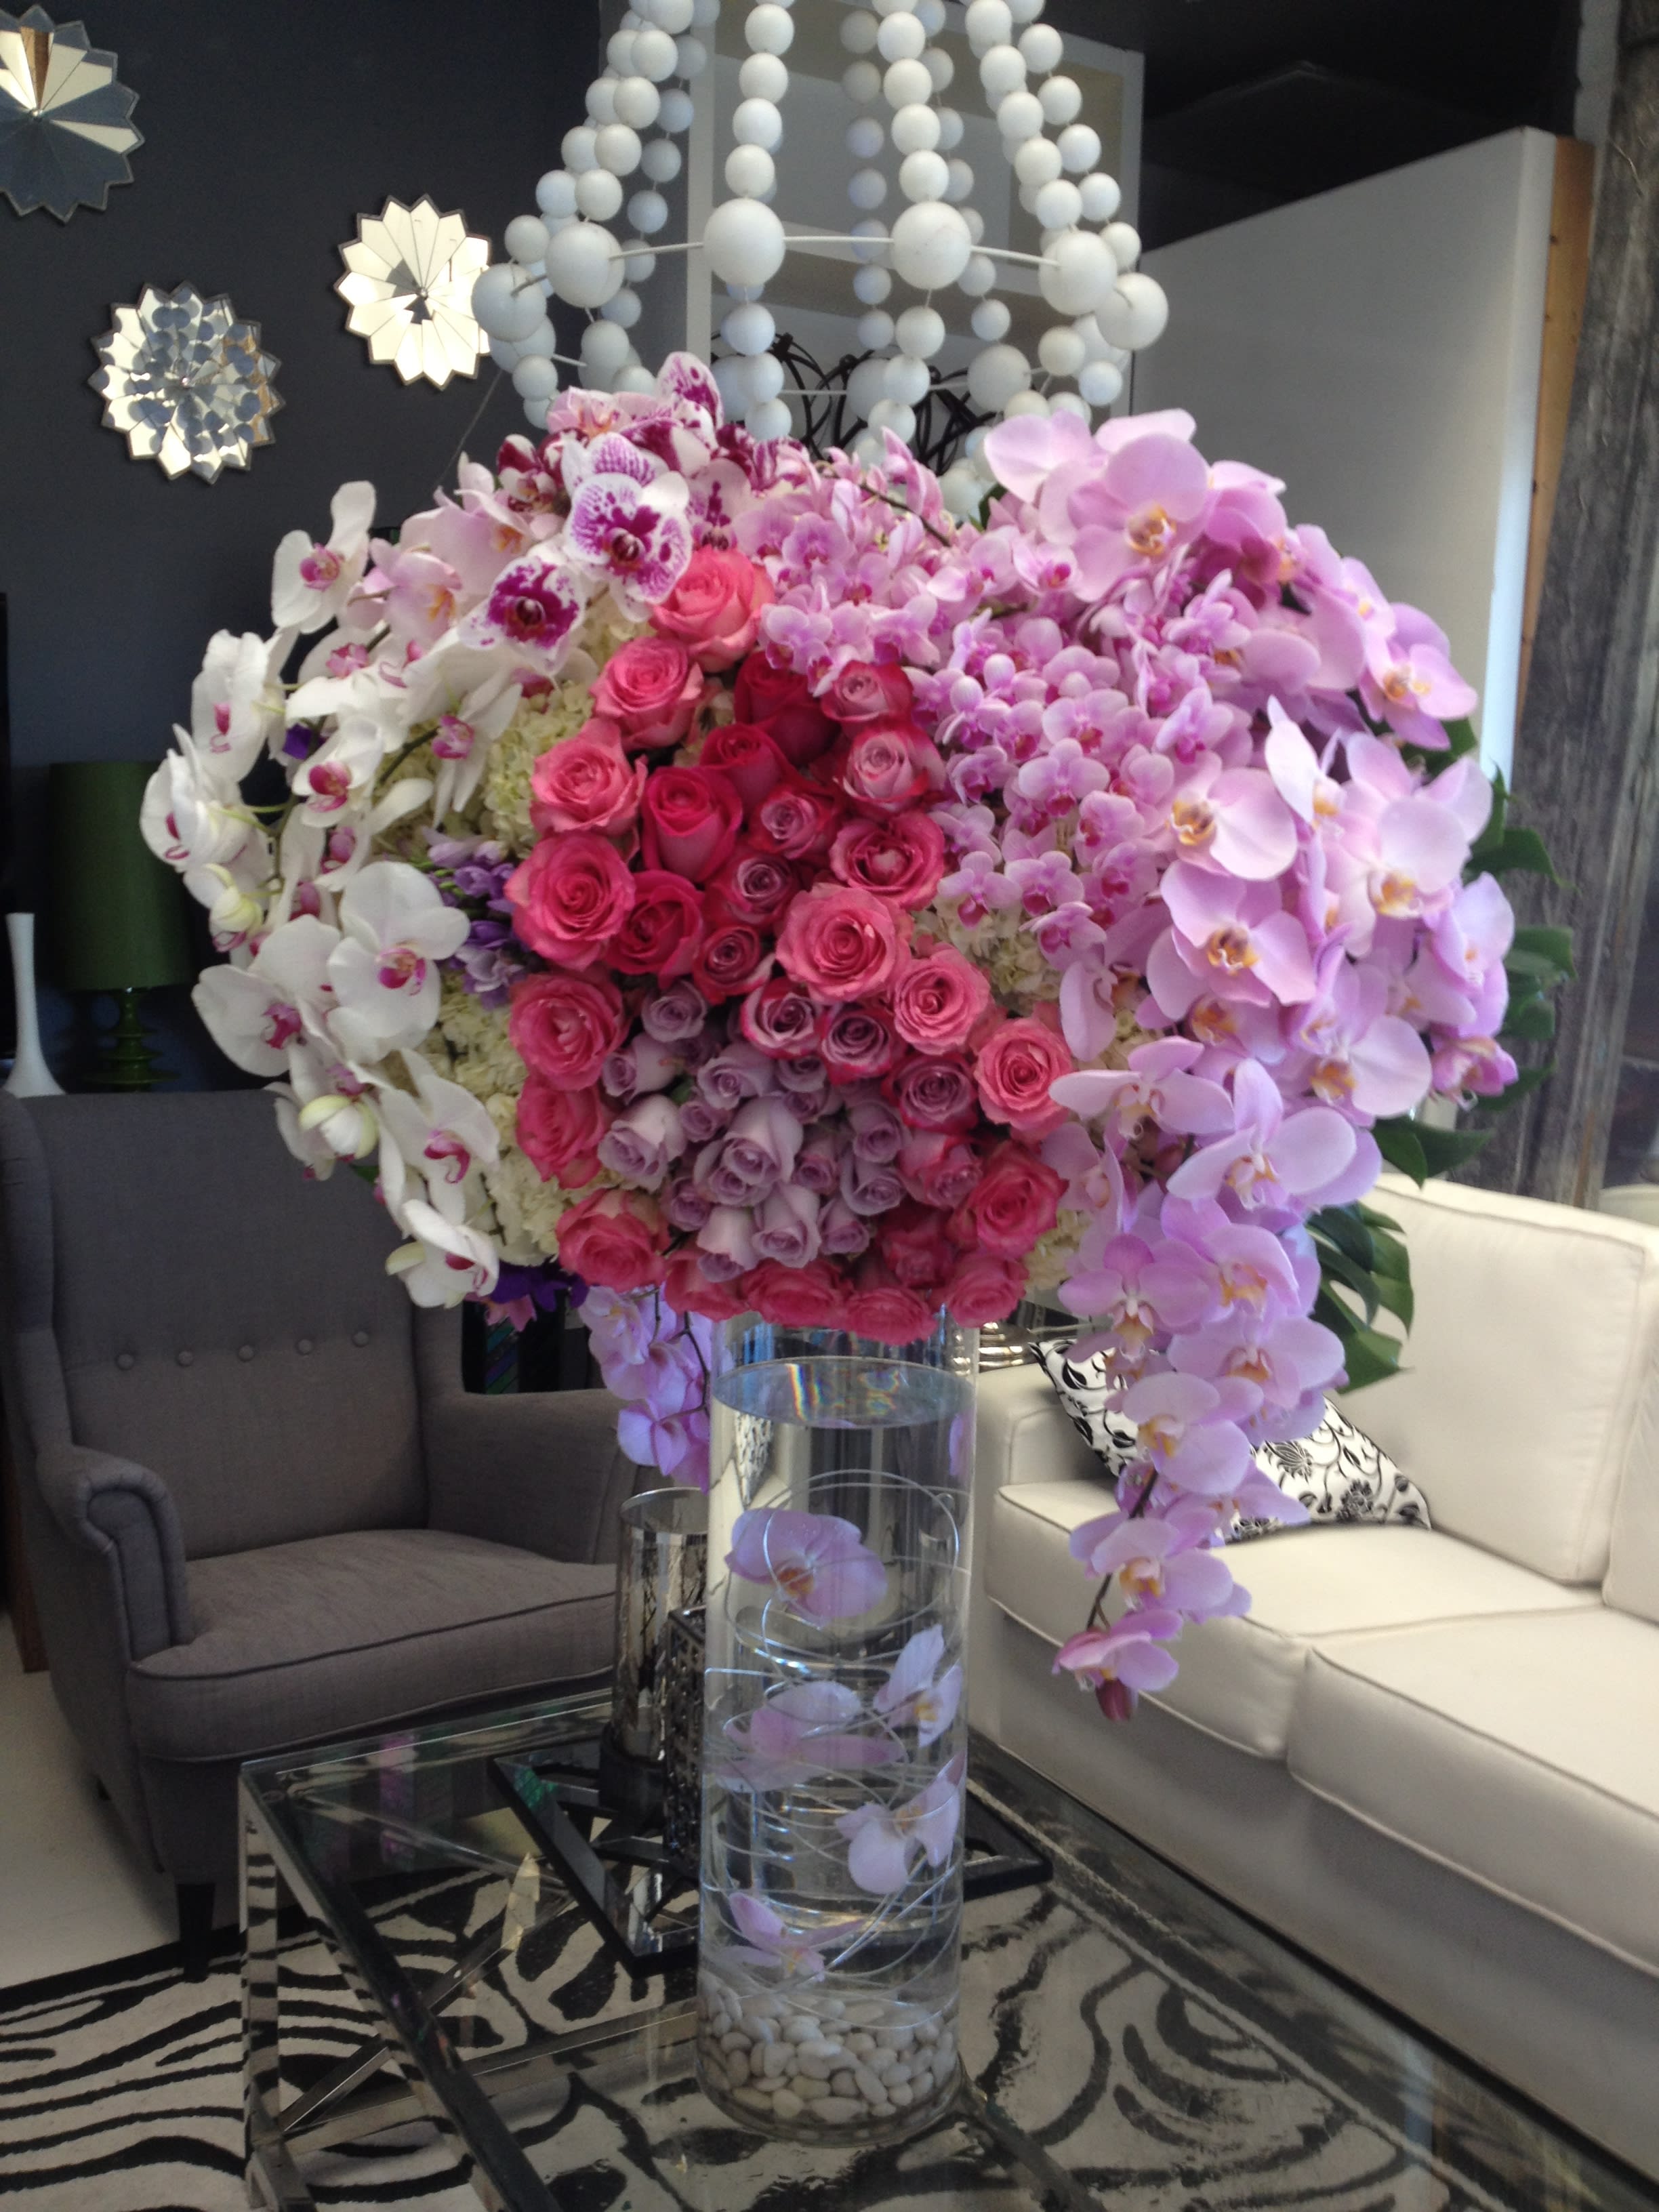 Pretty Woman - One of our most impressive arrangements! With cascading phalaenopsis orchids, roses, and hydrangea, this huge piece--sitting atop a tall cylinder vase with submerged orchids--will make the grandest of gestures, or statements for any space or person! 